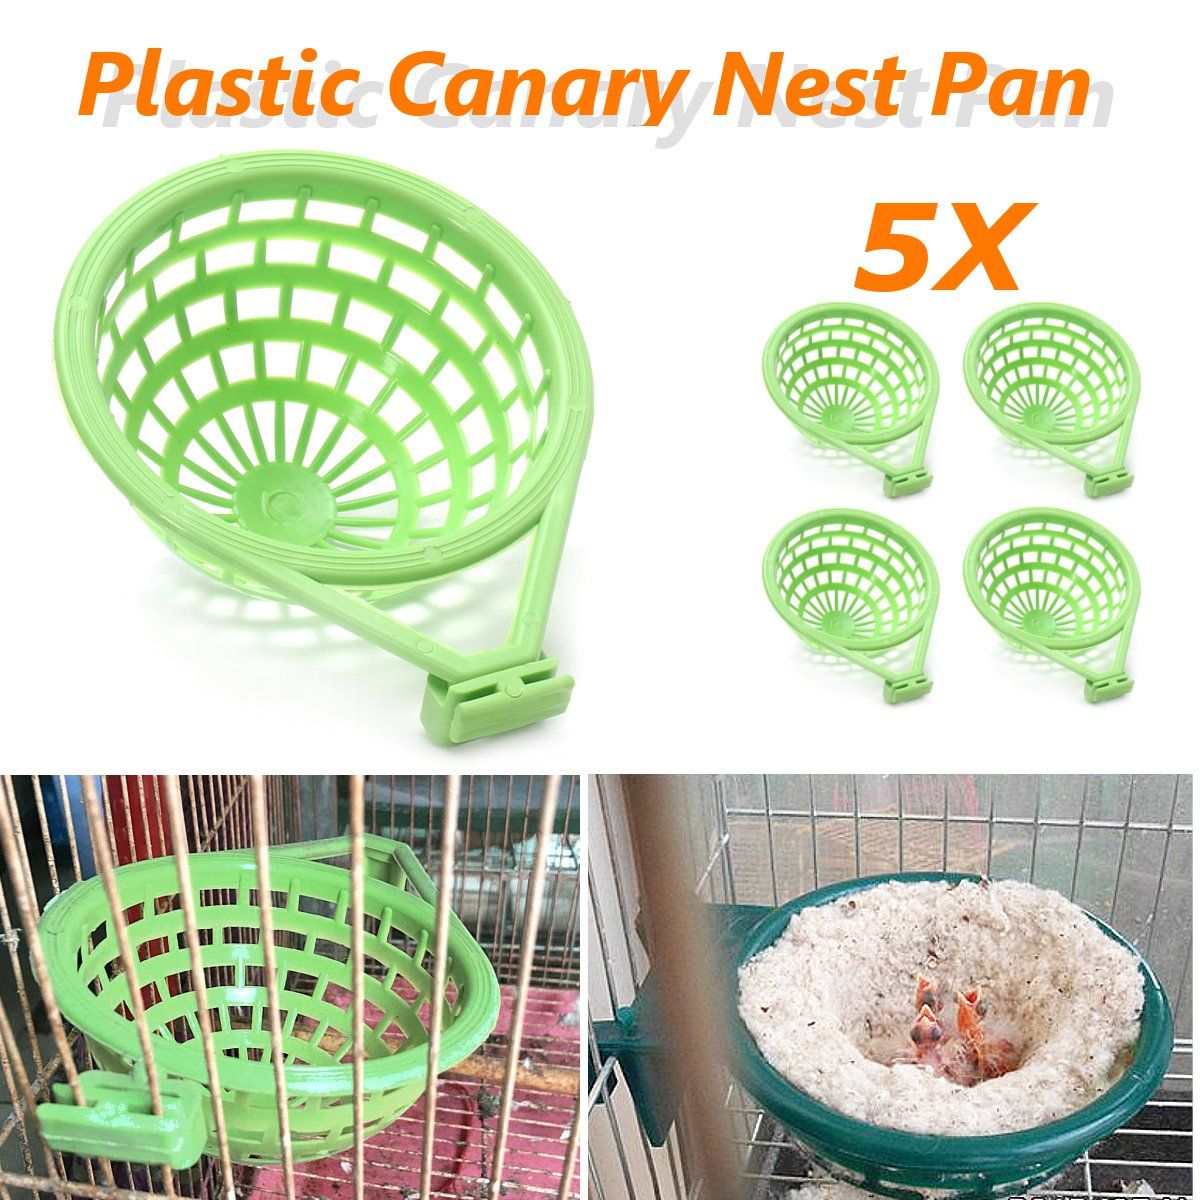 5pcs-Plastic-Canary-Nest-Pab-amp-Liner-for-Nesting-Canaries-Finches-Budgies-Hatch-Decorations-1496290